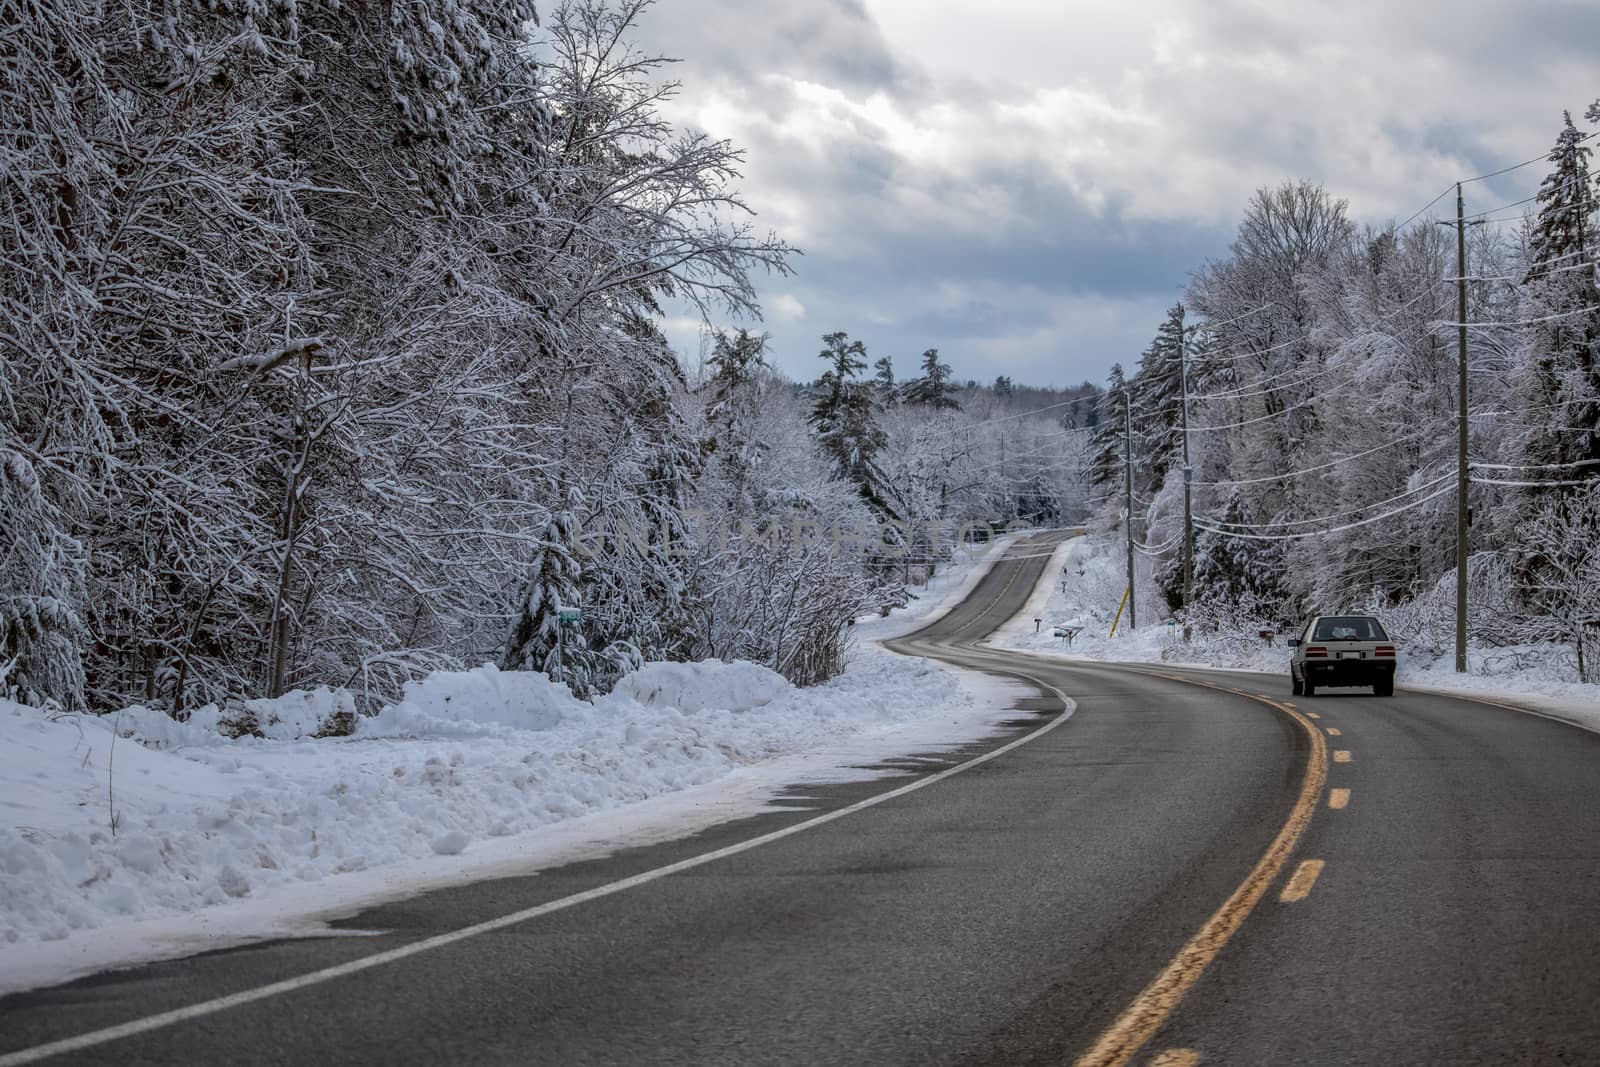 An older car is driving down a winding country road in the winter, with forest trees on either side of the road coated in a thick layer of fresh snow.